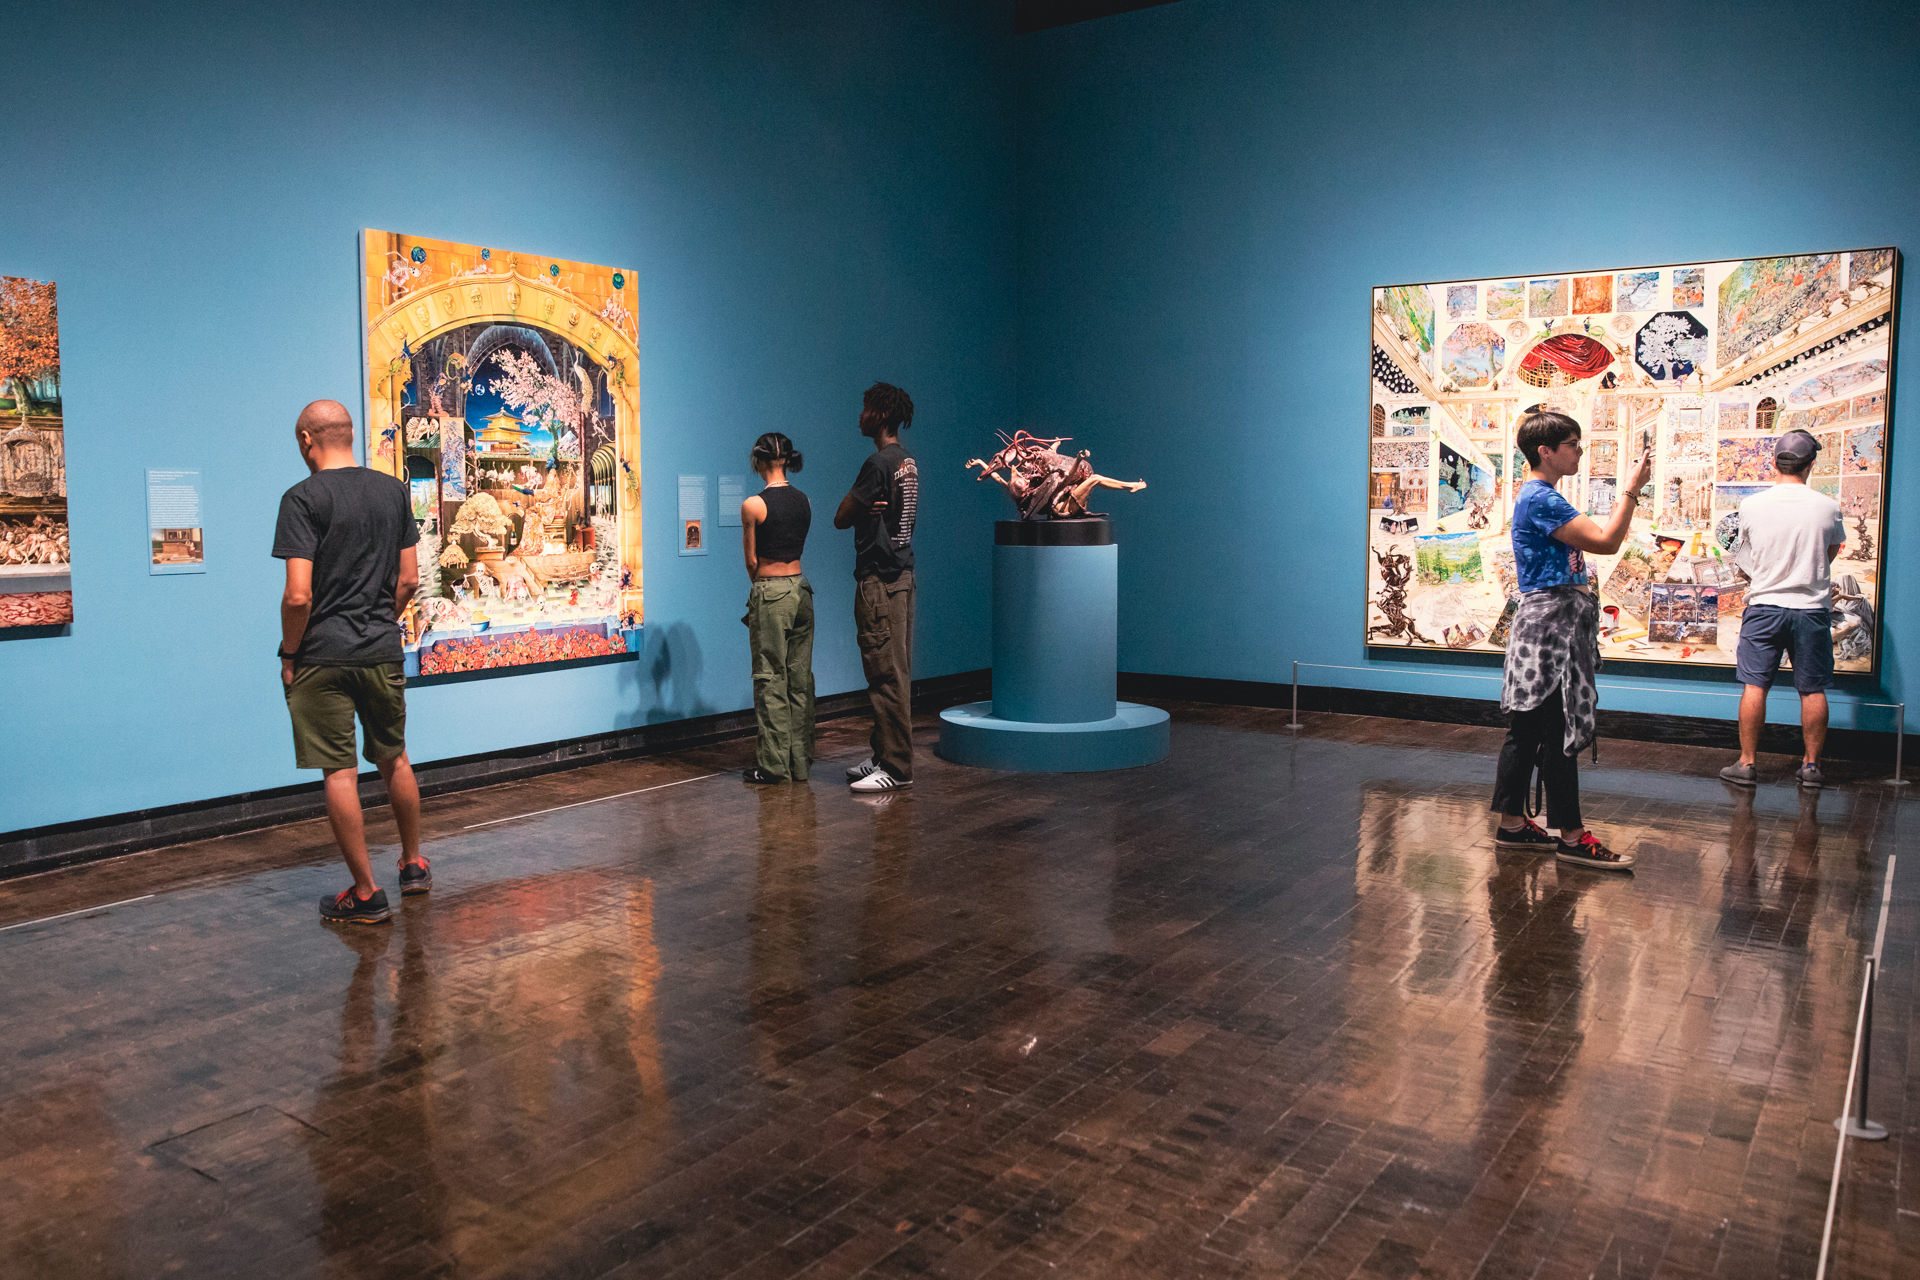 People looking at artwork in the Raqib Shaw exhibition